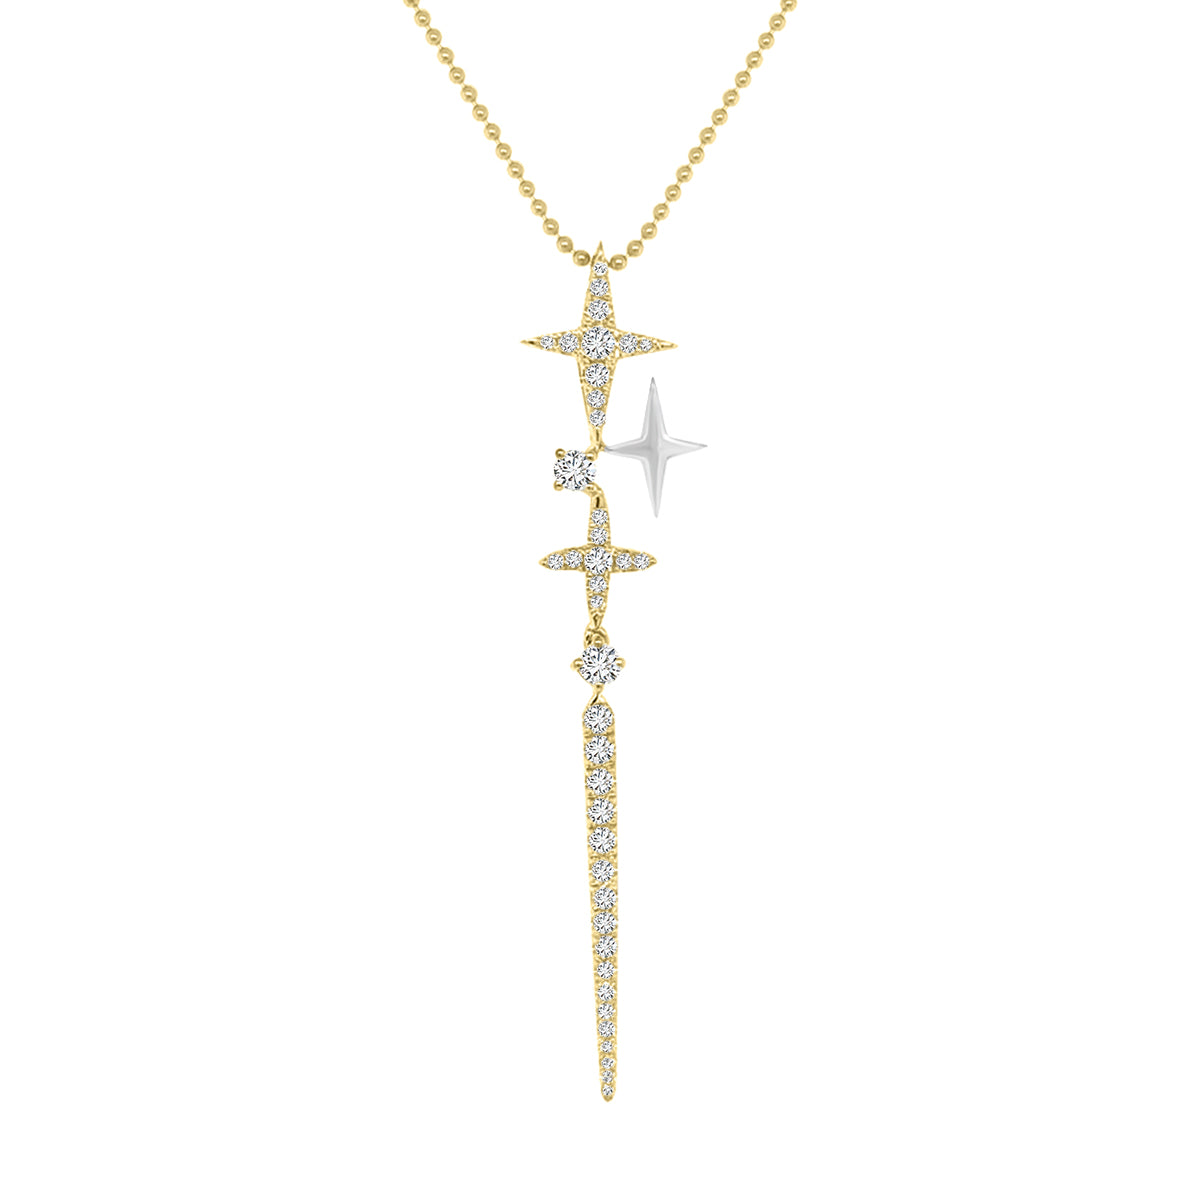 Starry Diamond Pendant Necklace In 18k Yellow Gold.